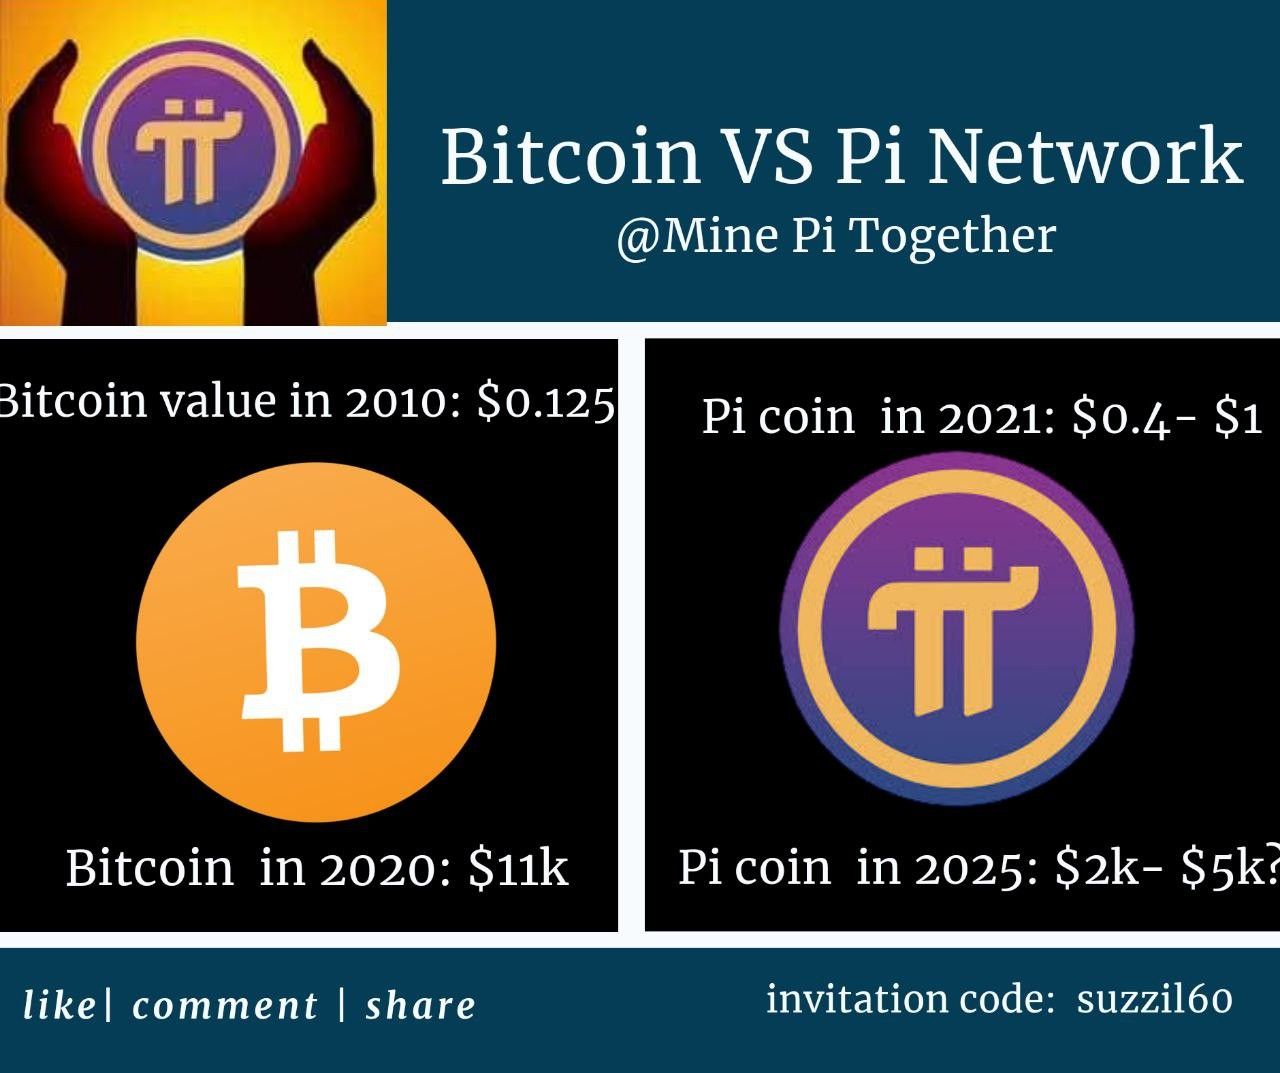 Pi Price Prediction , , Can Pi Network touch USD? - Crypto Bulls Club